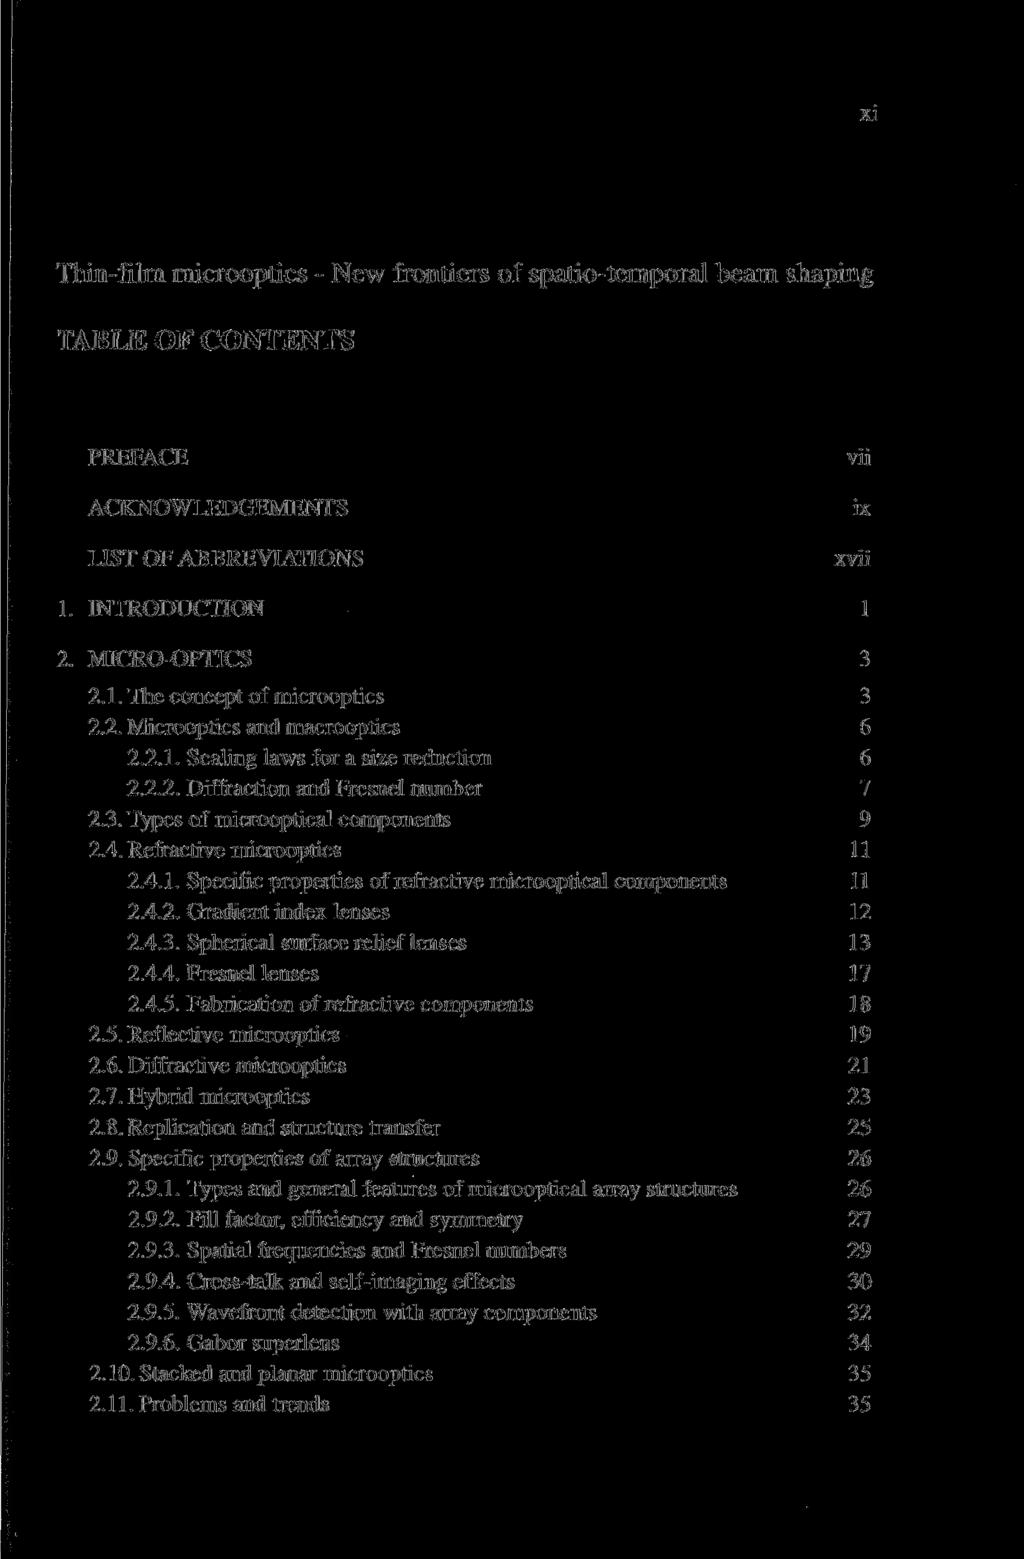 Thin-film microoptics - New frontiers of spatio-temporal beam shaping TABLE OF CONTENTS PREFACE ACKNOWLEDGEMENTS LIST OF ABBREVIATIONS vii ix xvii 1. INTRODUCTION 1 2. MICRO-OPTICS 3 2.1. The concept of microoptics 3 2.